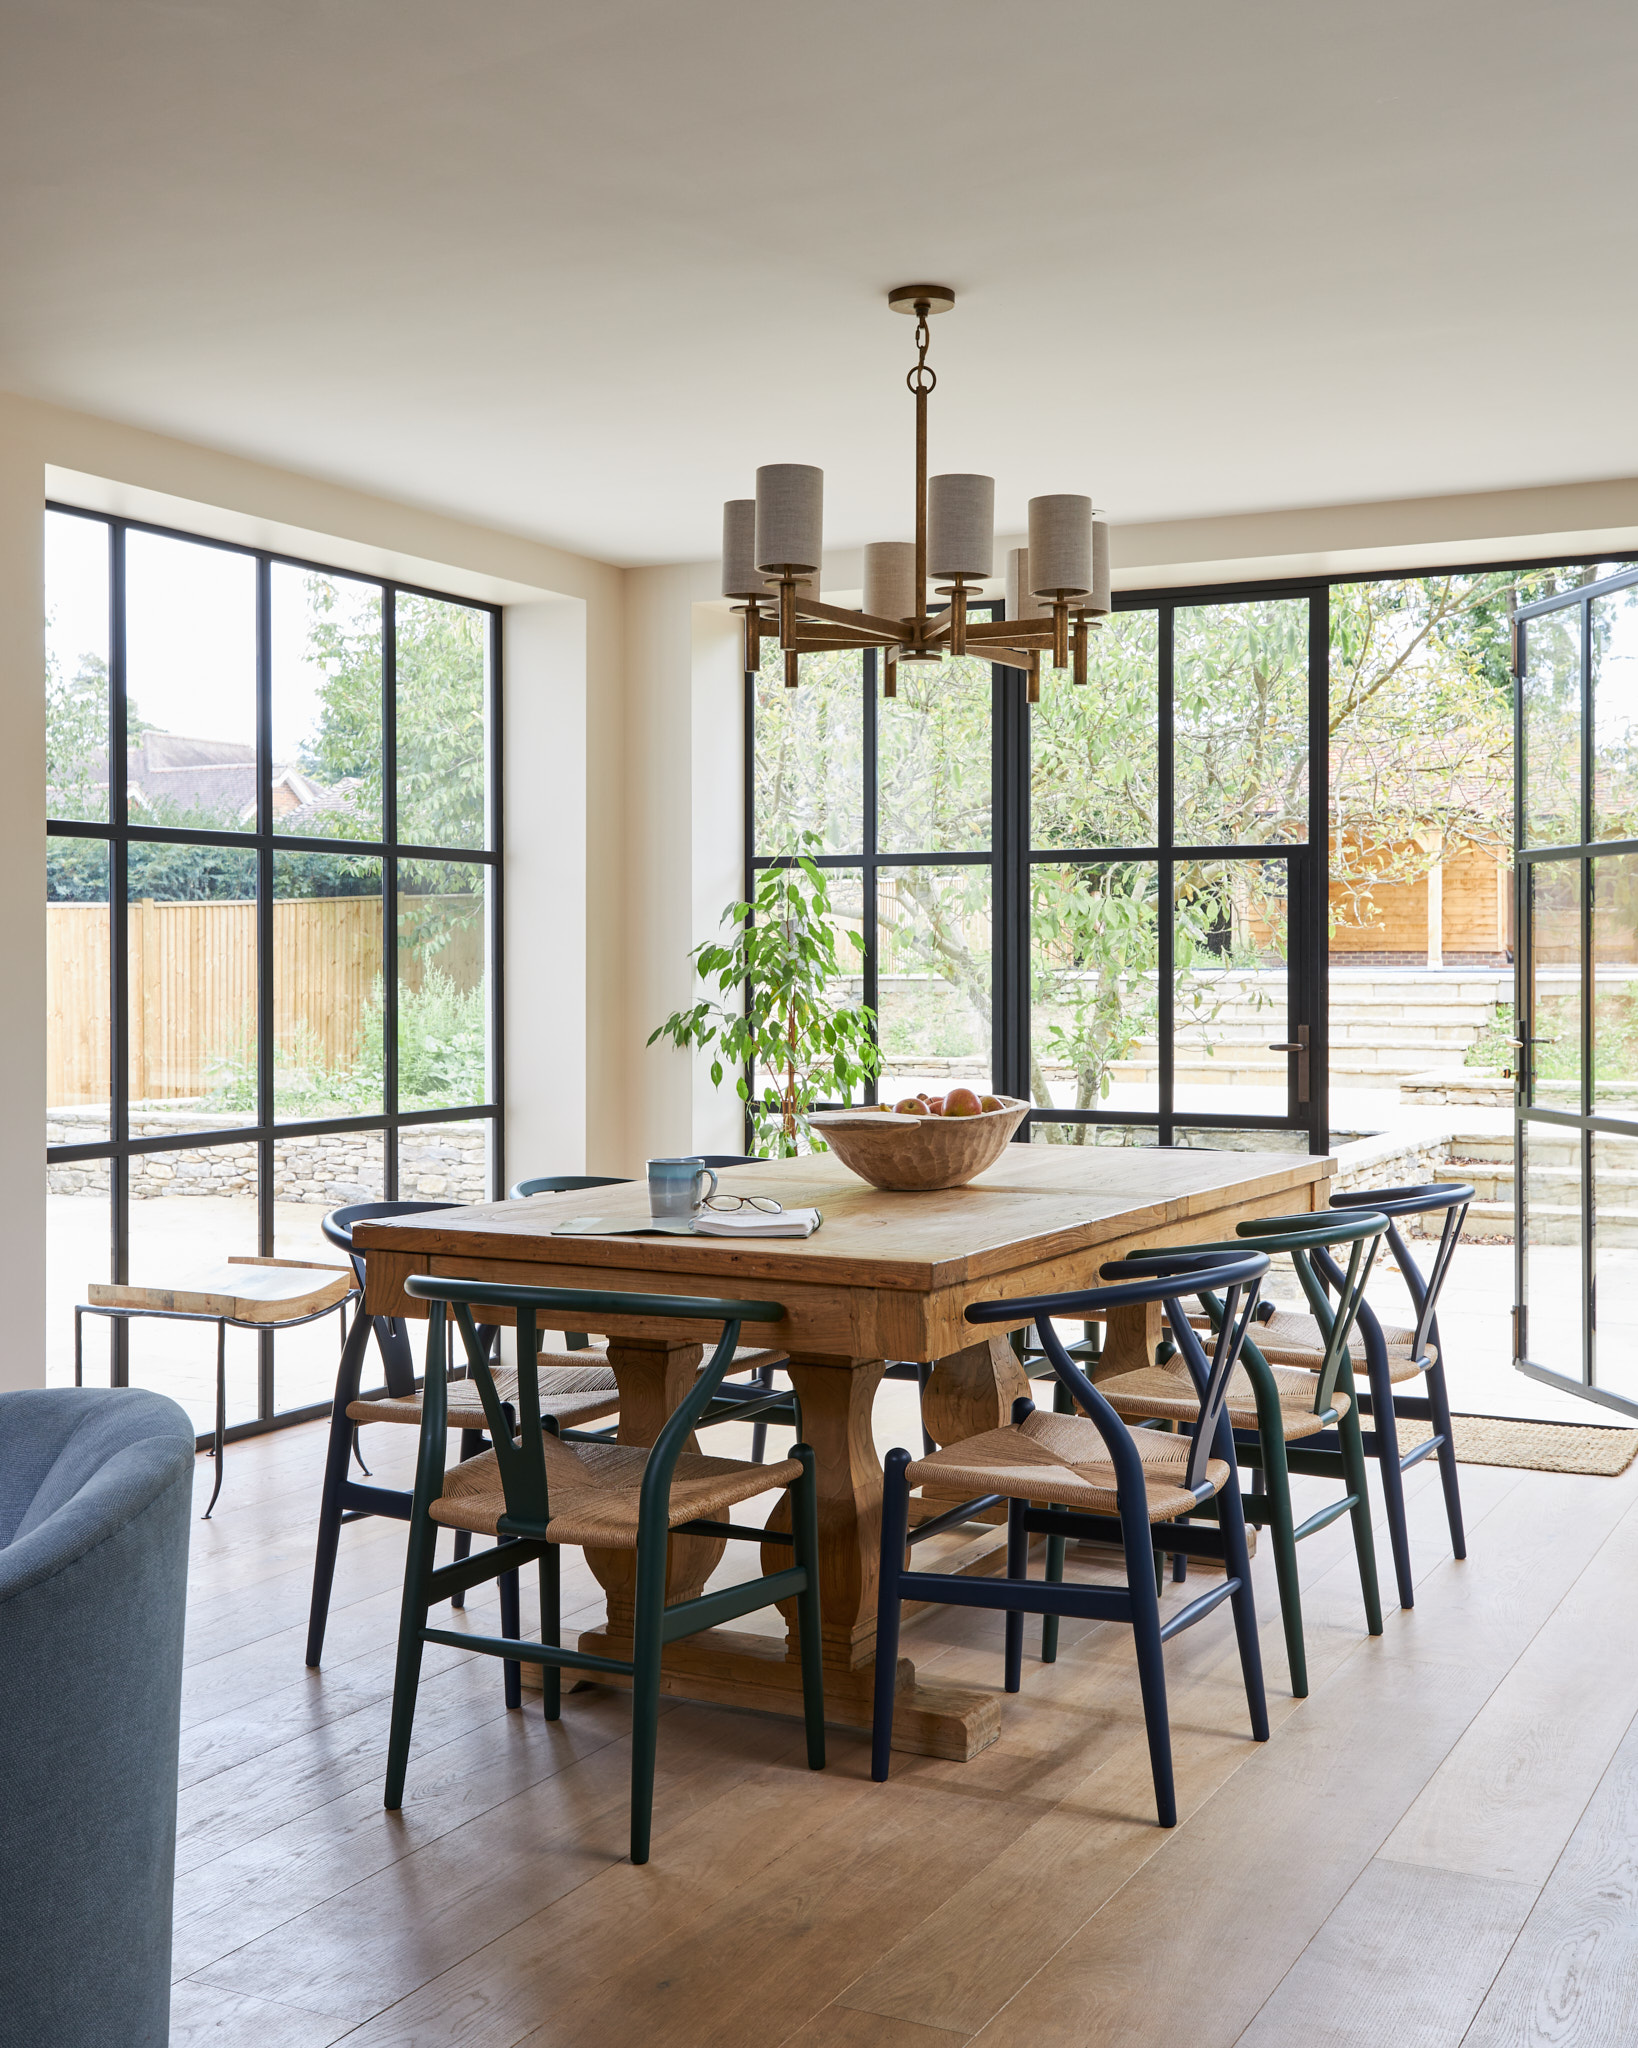 Kitchen table with wishbone chairs and crittal windows and doors.  Porta Romana pendant